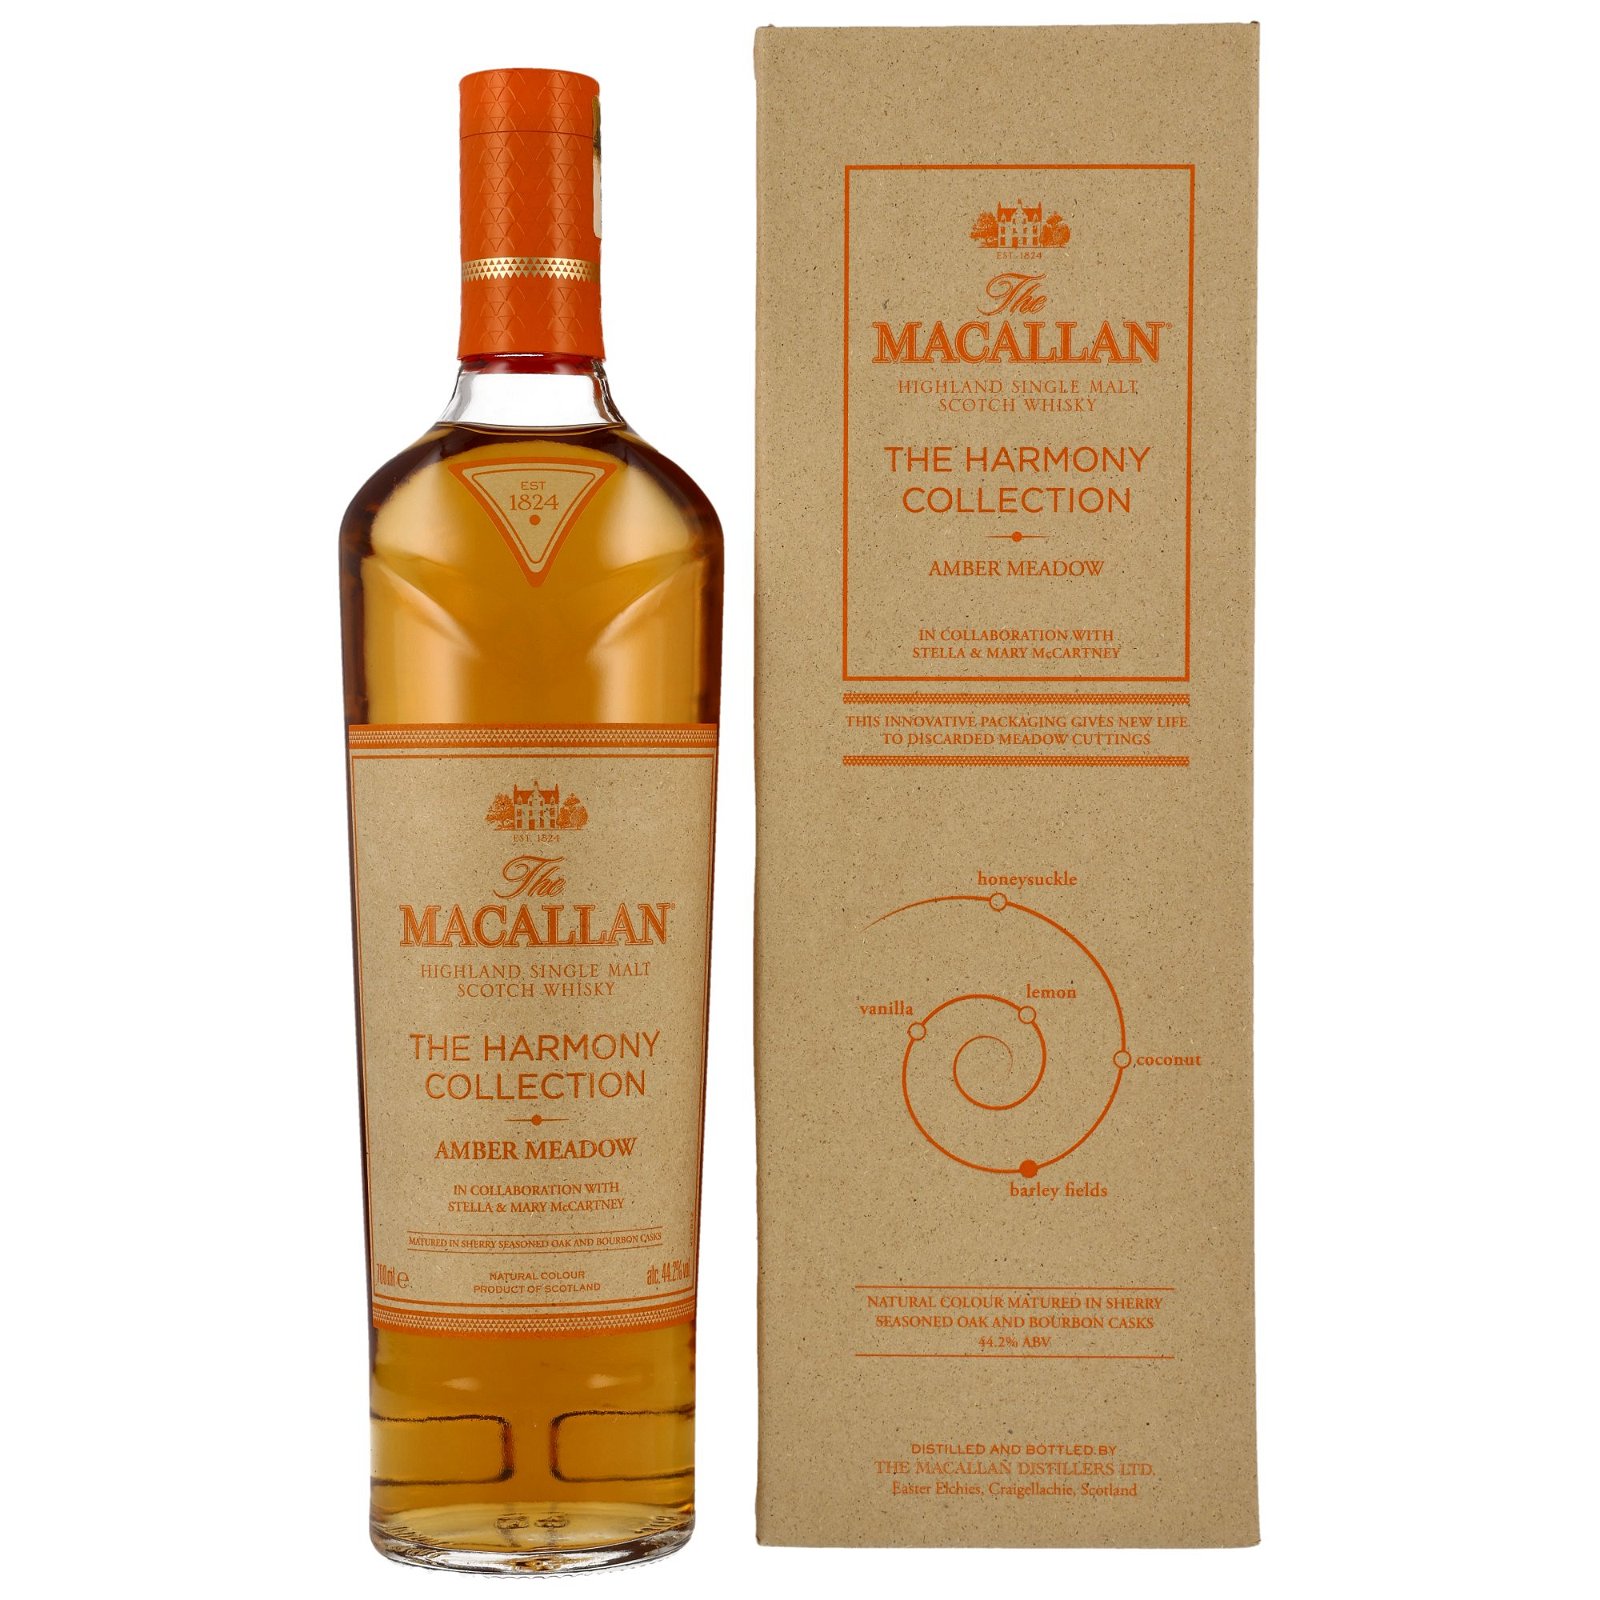 Macallan Amber Meadow The Harmony Collection